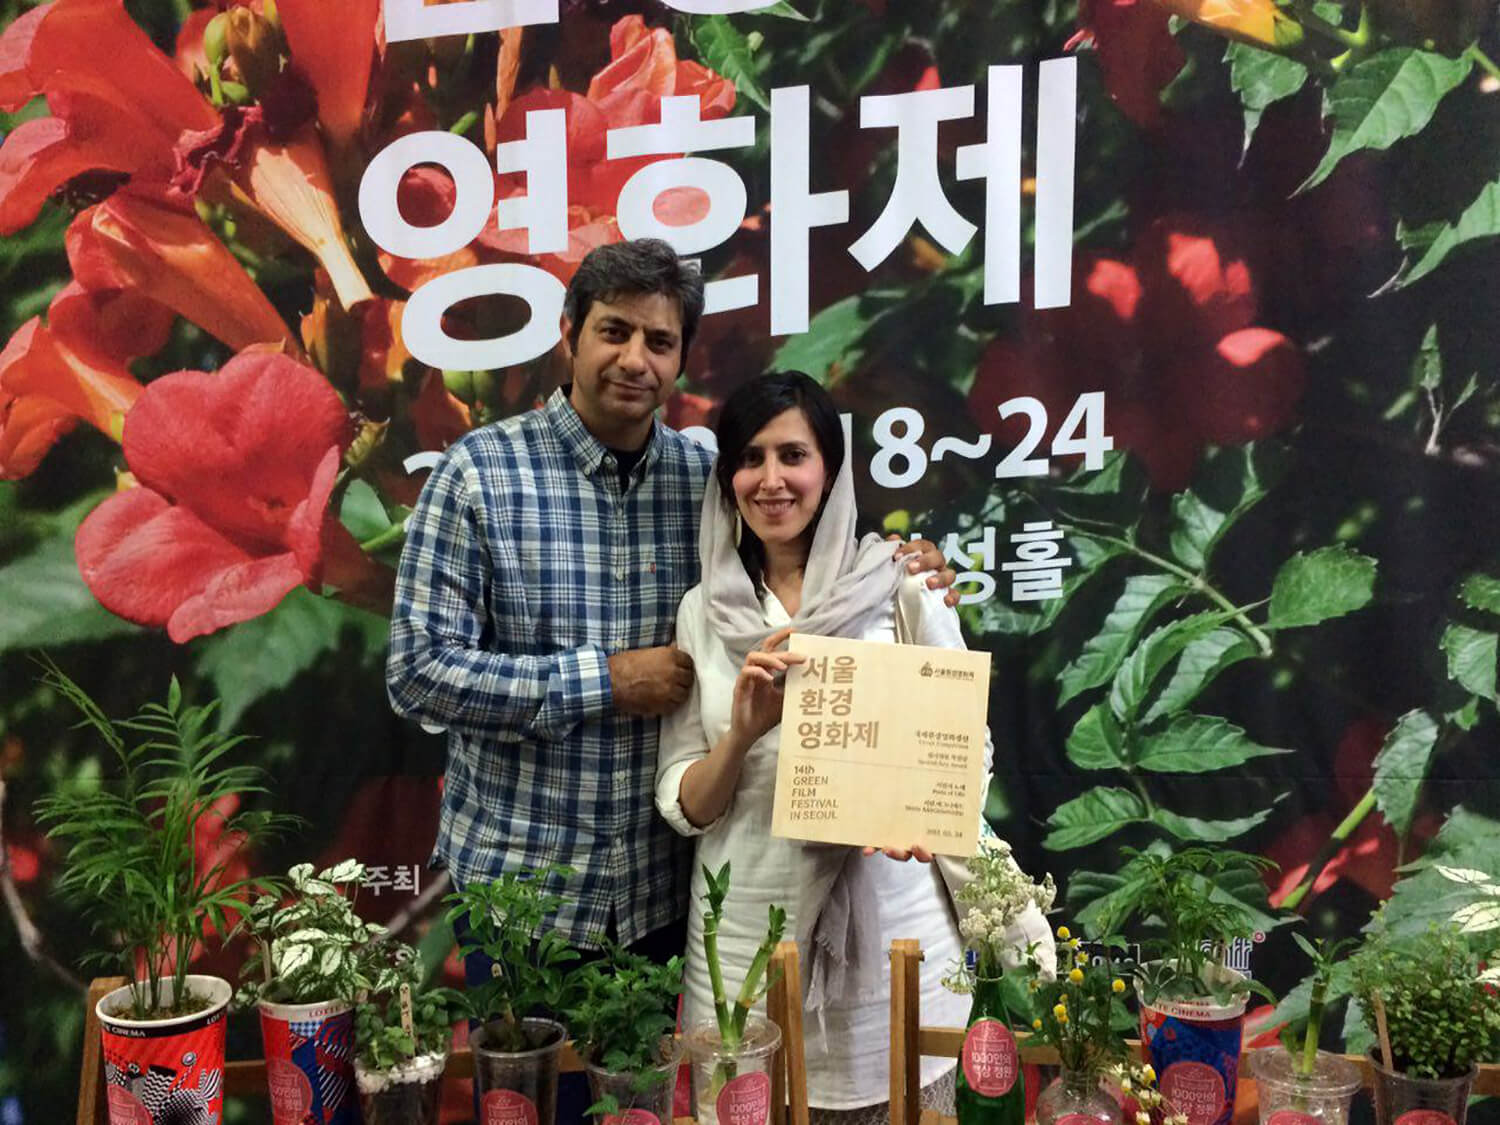 Special Jury Award at “Green Film Festival” in Seoul Goes to the Documentary “Poets of Life”